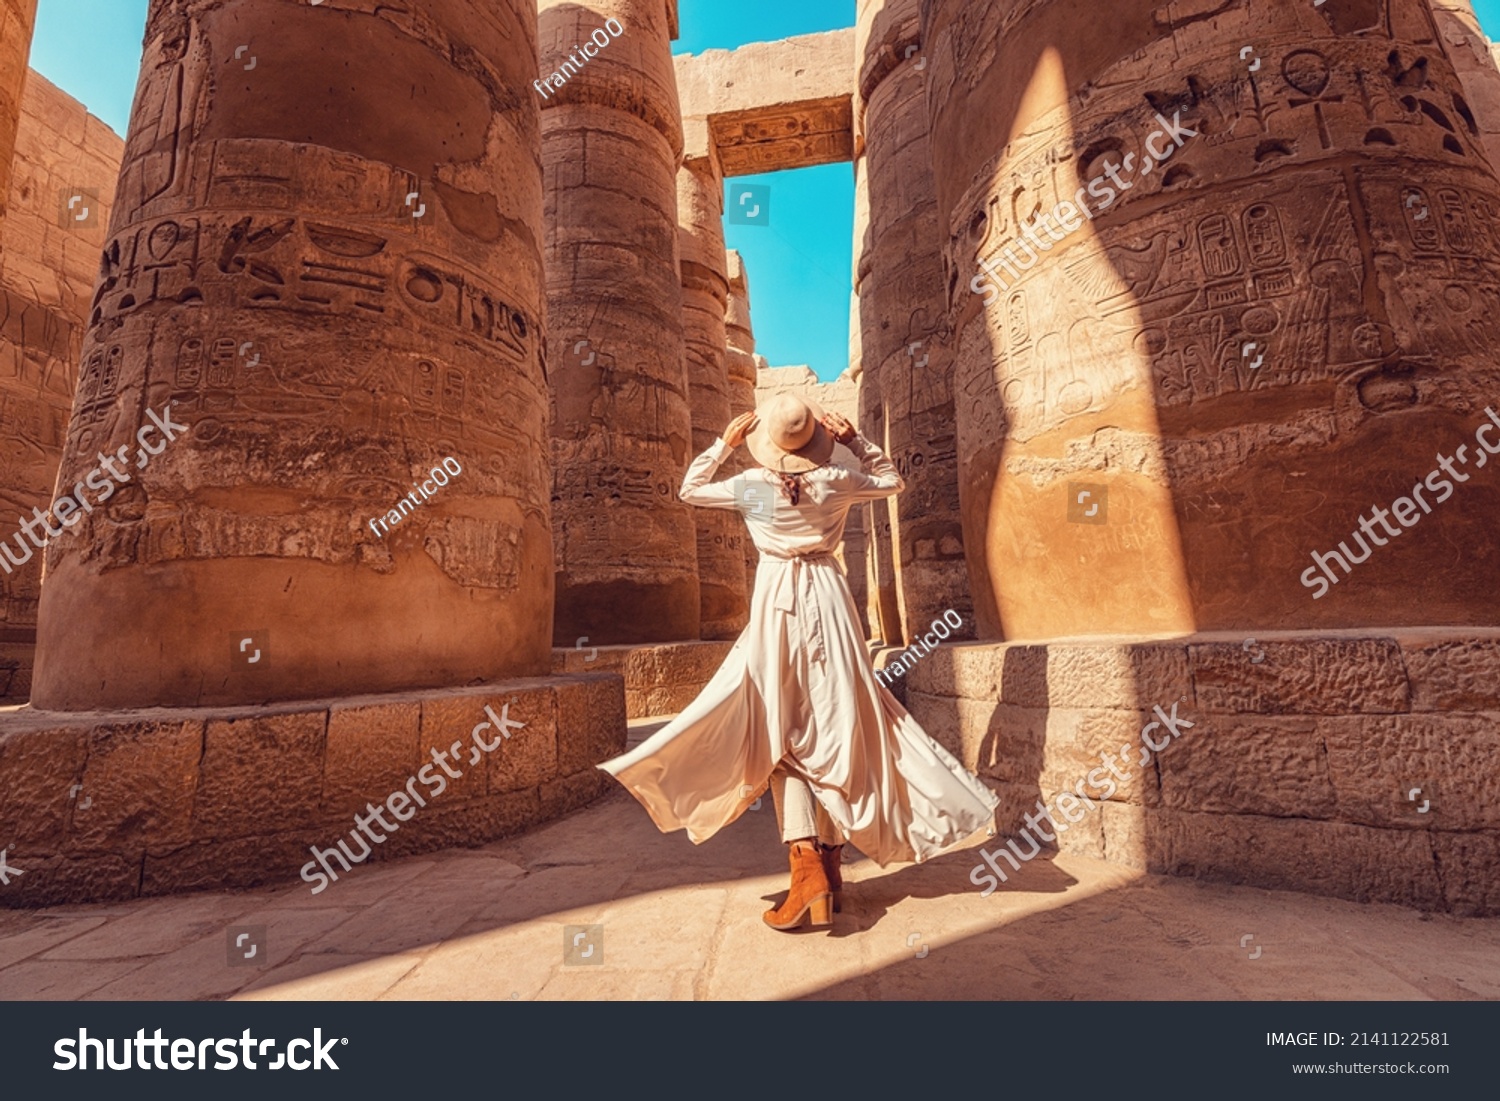 Woman traveler explores the ruins of the ancient Karnak temple in the city of Luxor in Egypt. Great row of columns with carved hieroglyph #2141122581